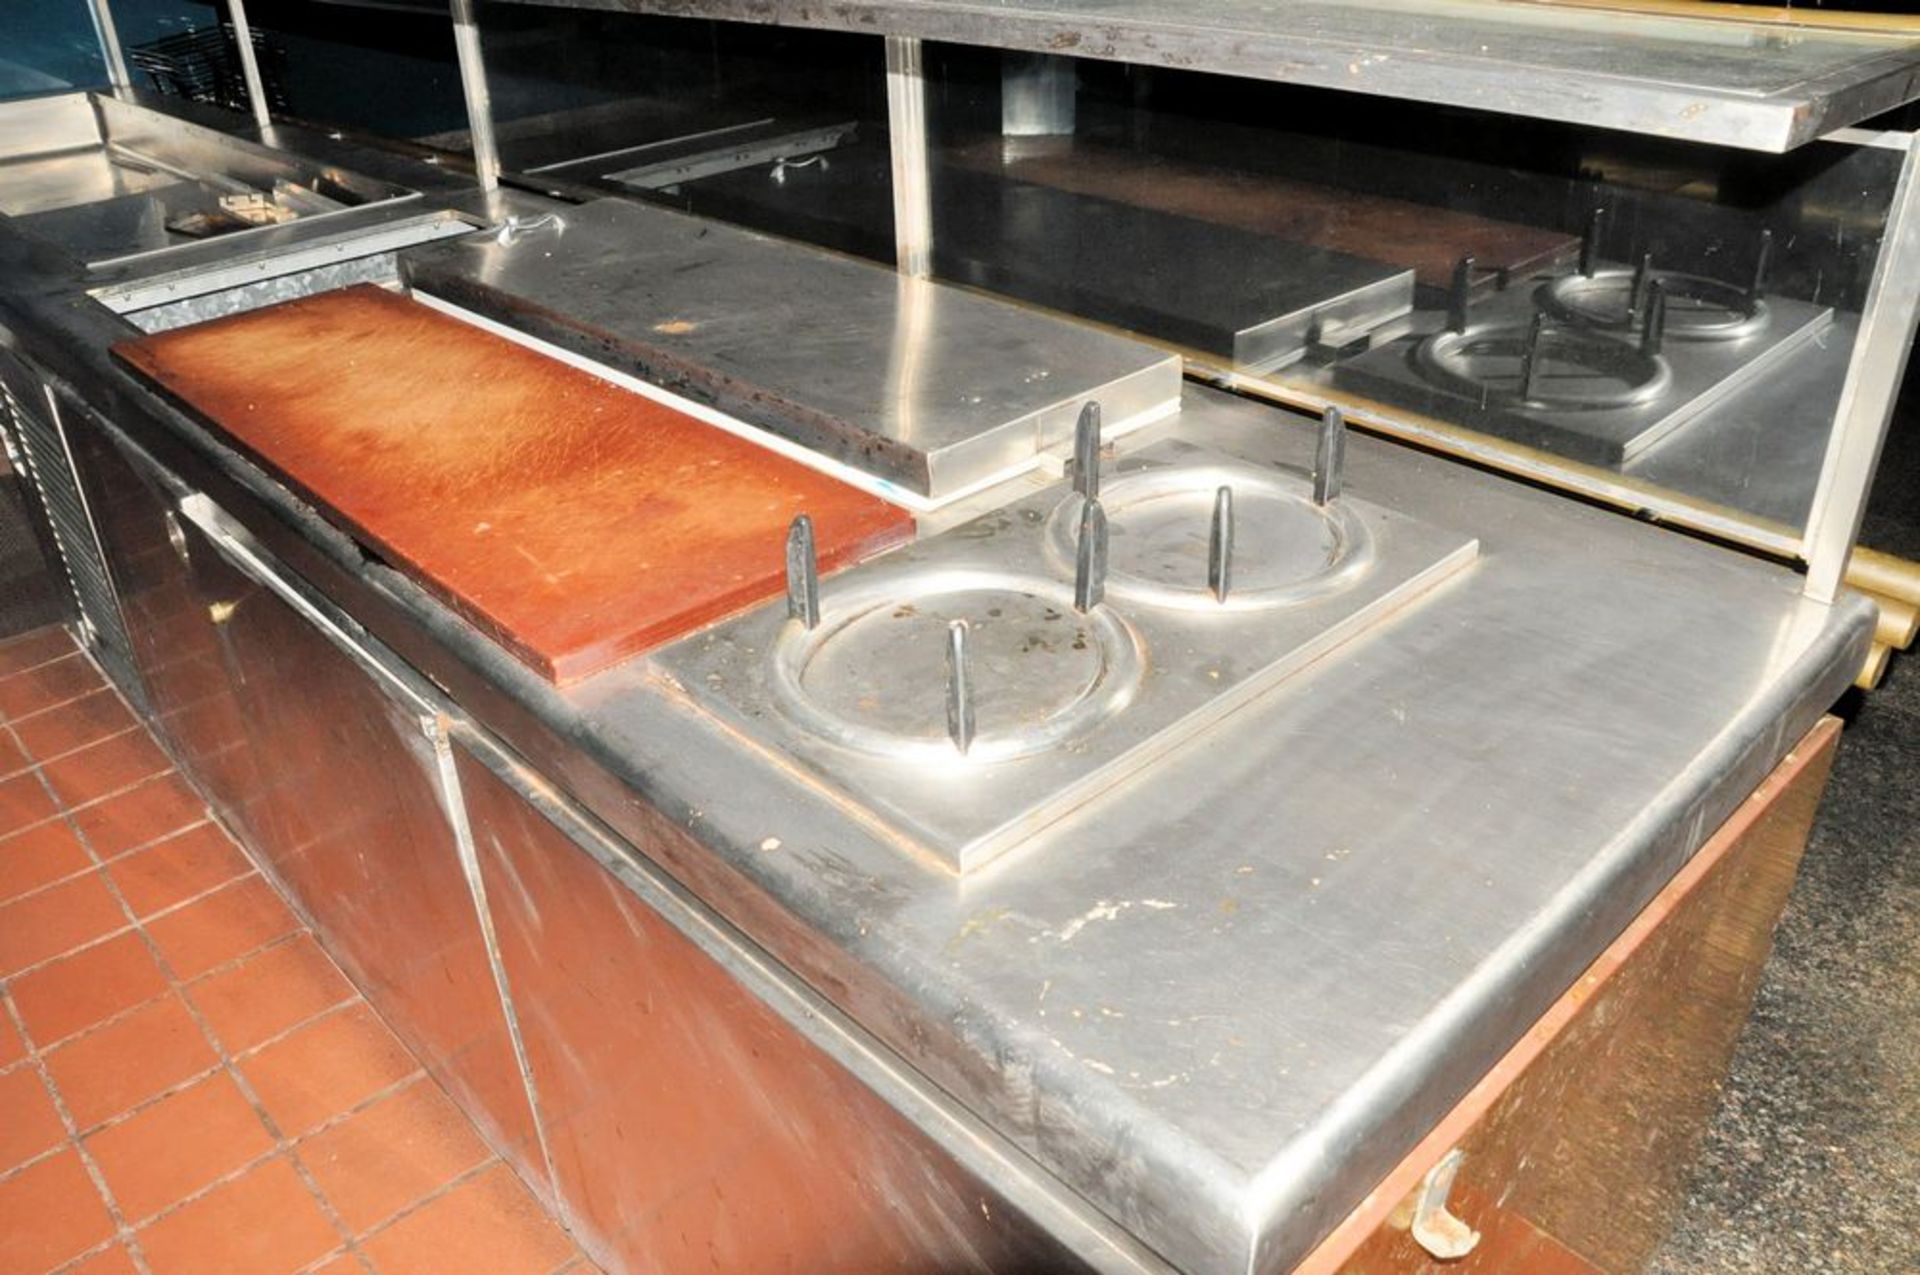 Stainless Steel Cold Sandwich Server Station, 3' x 16', with Overhead Sneeze Guard, (Main Kitchen - Image 4 of 4